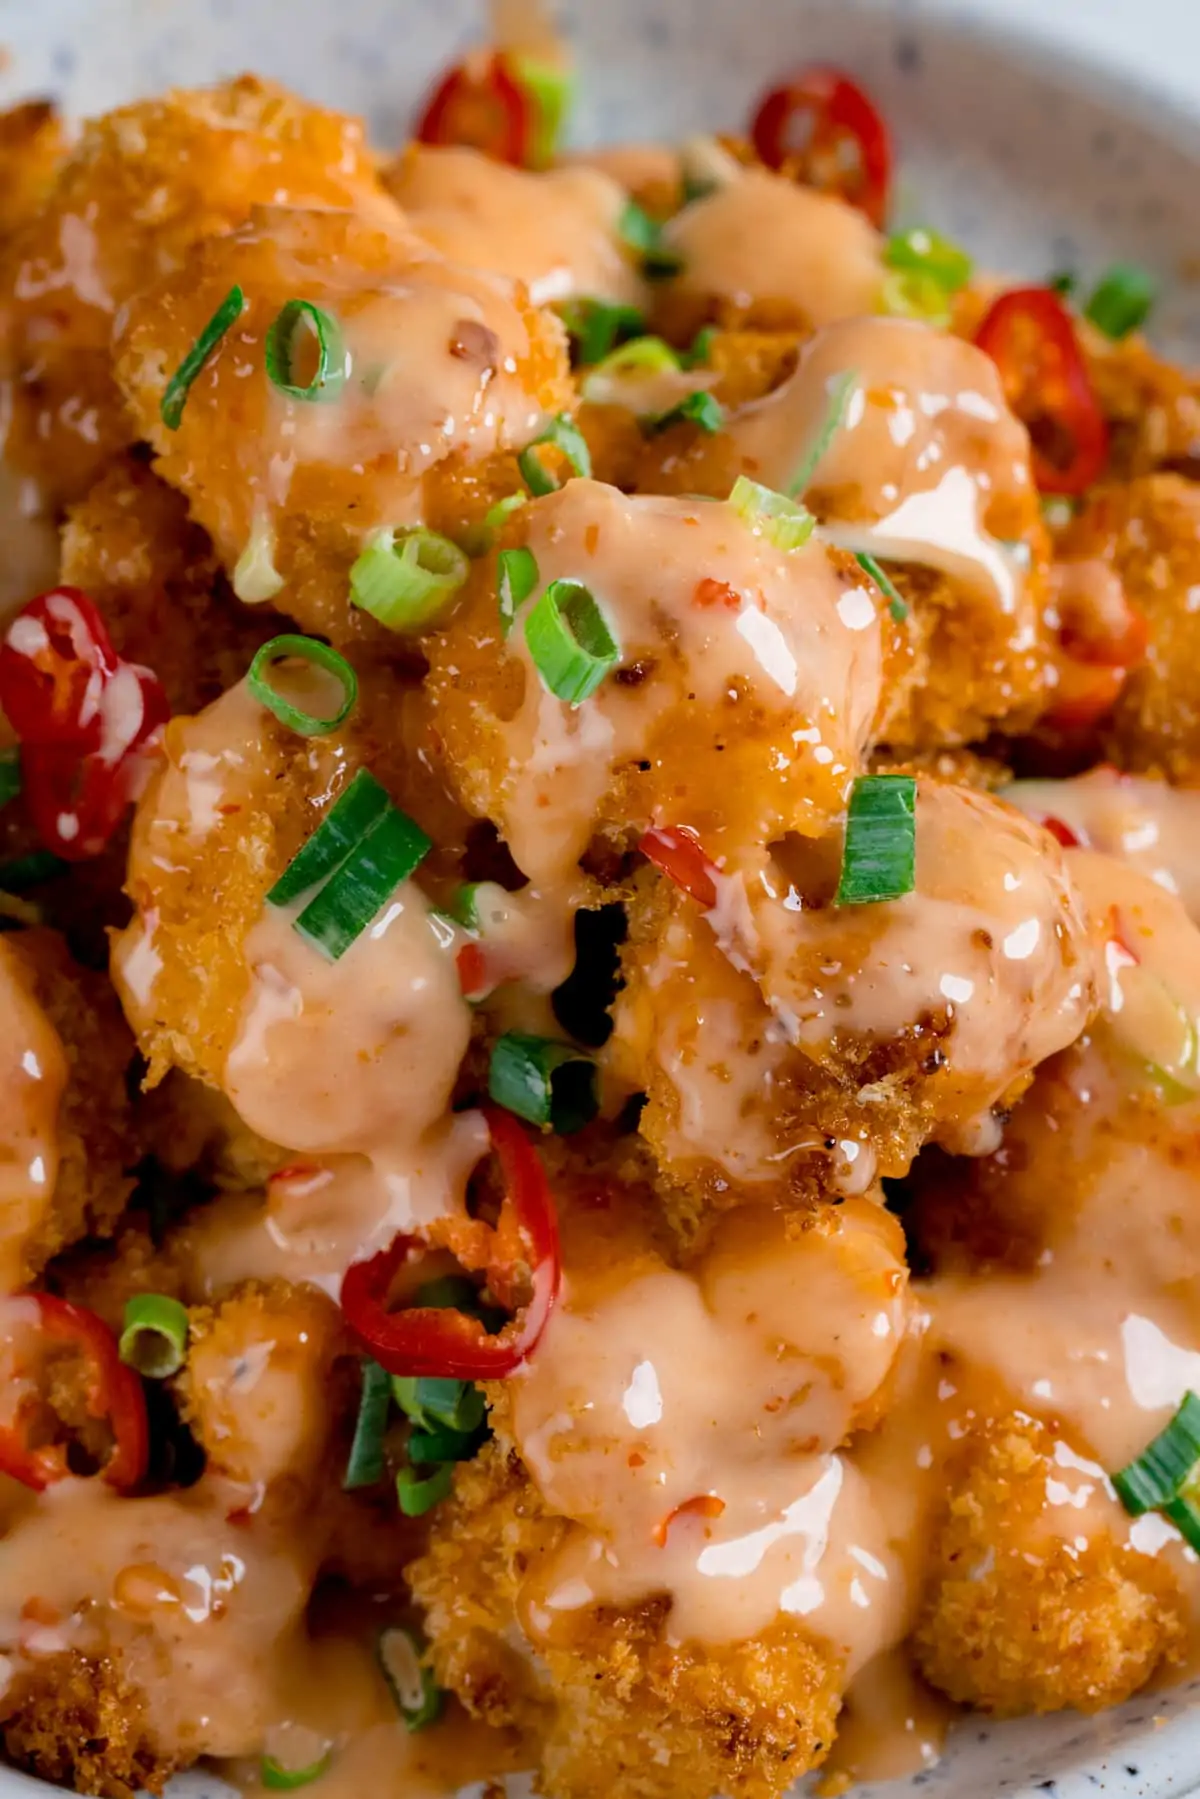 Crispy chicken pieces smothered in bang bang sauce, topped with spring onions and chillies